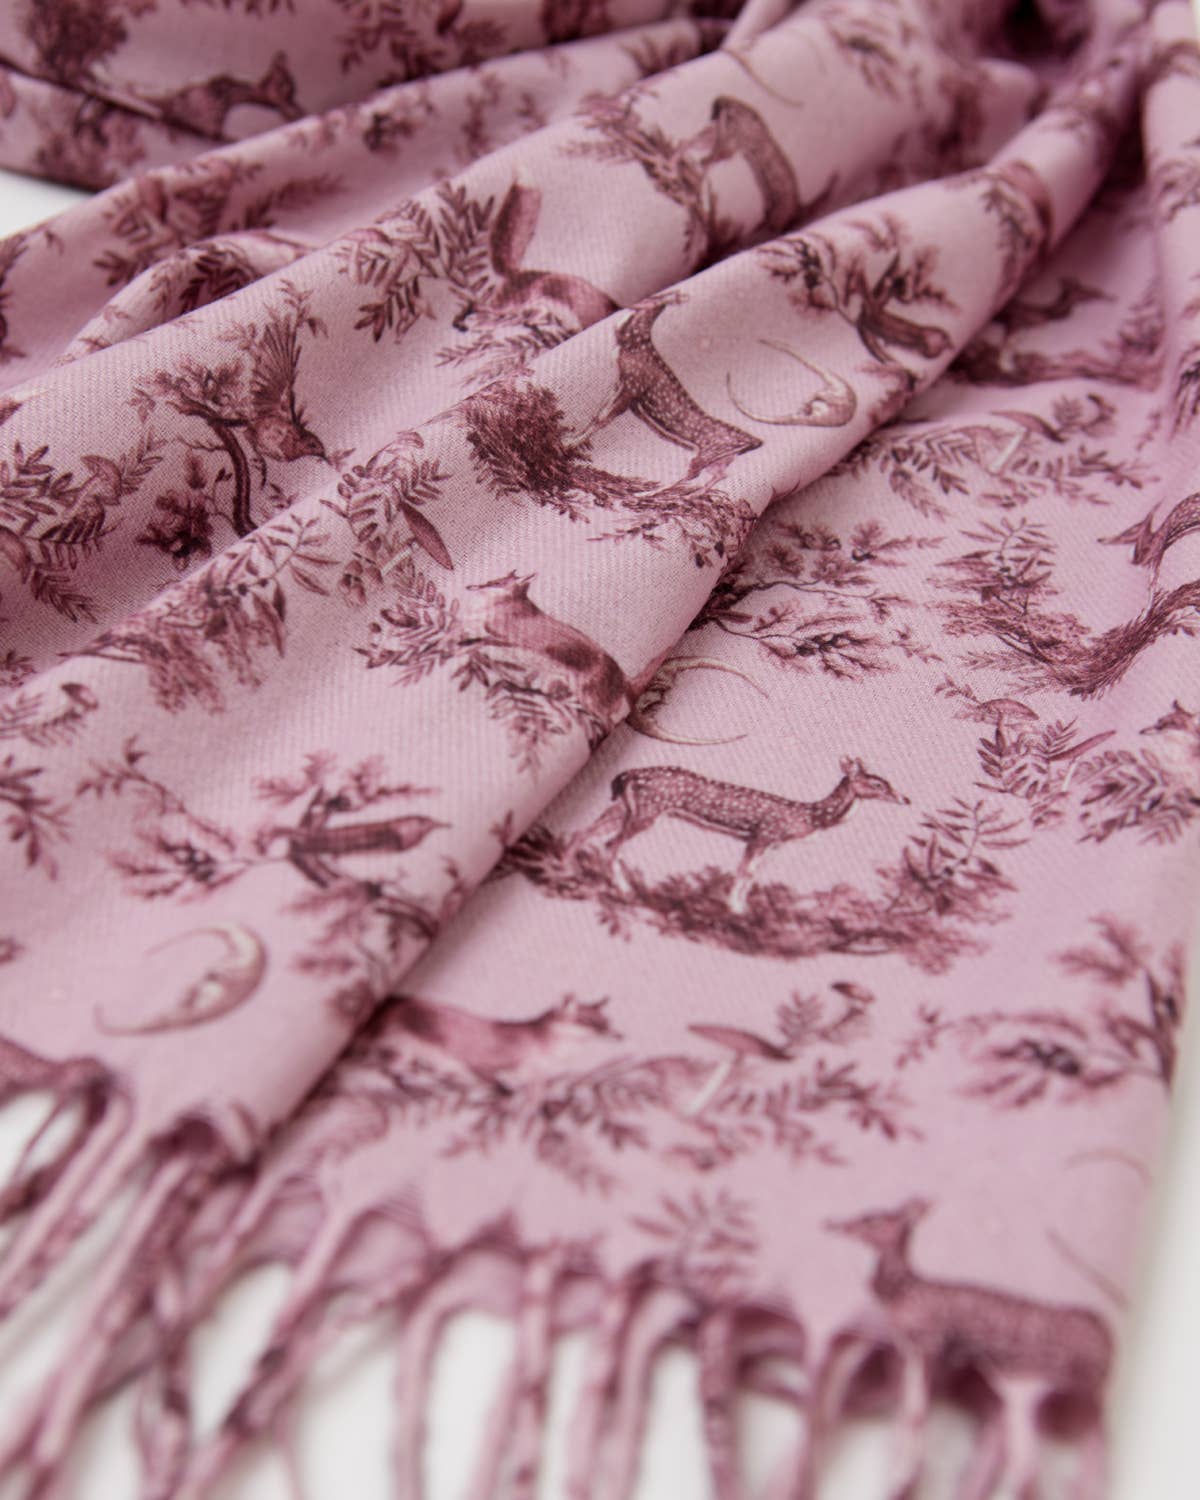 Fable England A Night's Tale - Dusky Rose Woodland- Heavyweight Scarf. Enniskillen Shopping Centre. Fable England where to buy